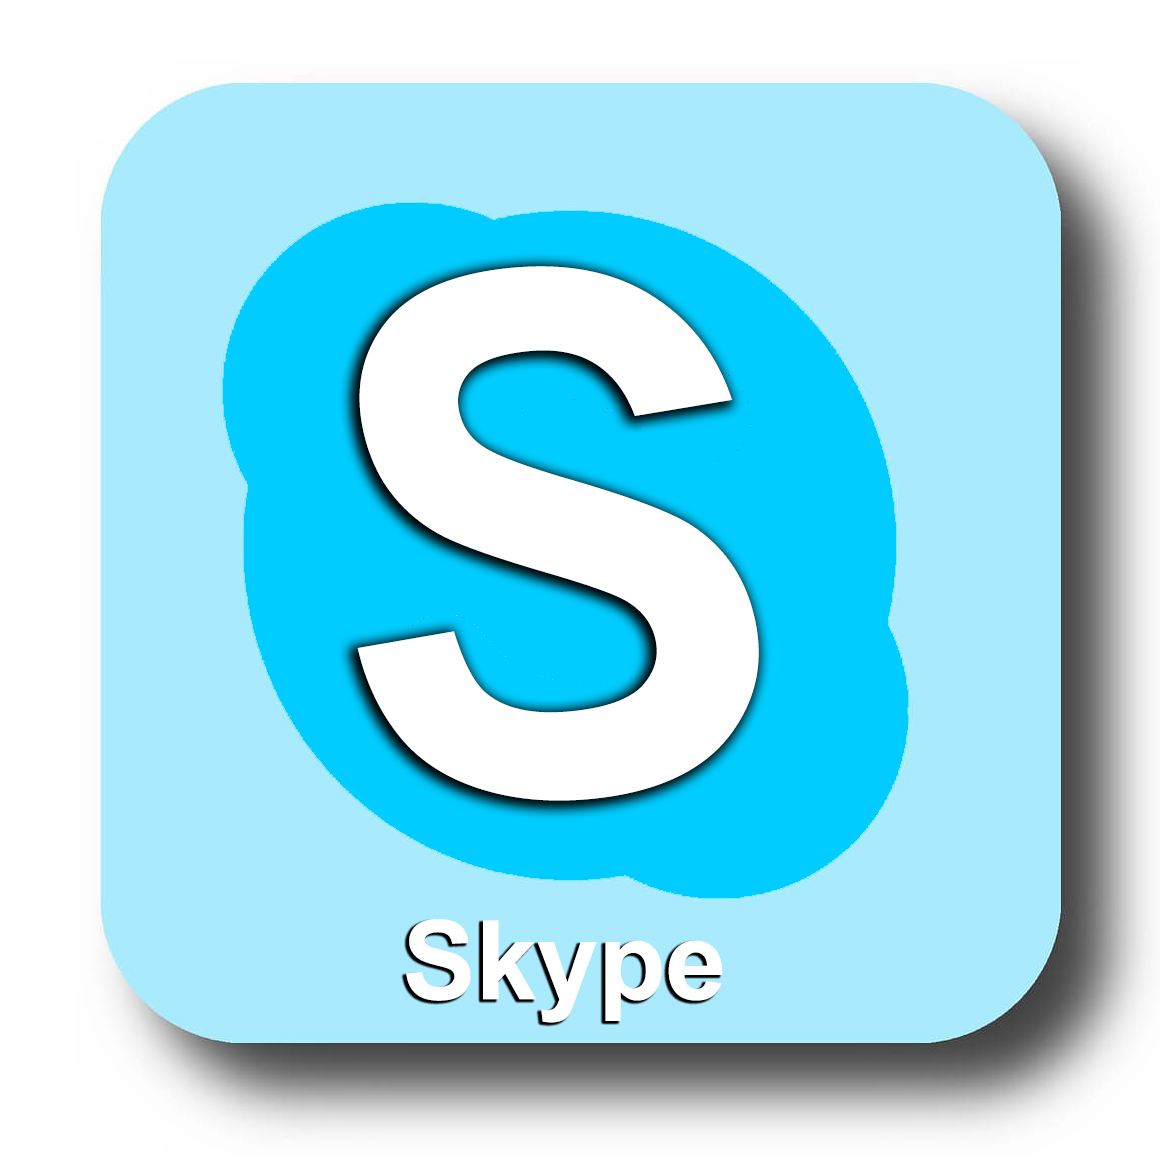 Skype free Download for Windows - latest version 2020